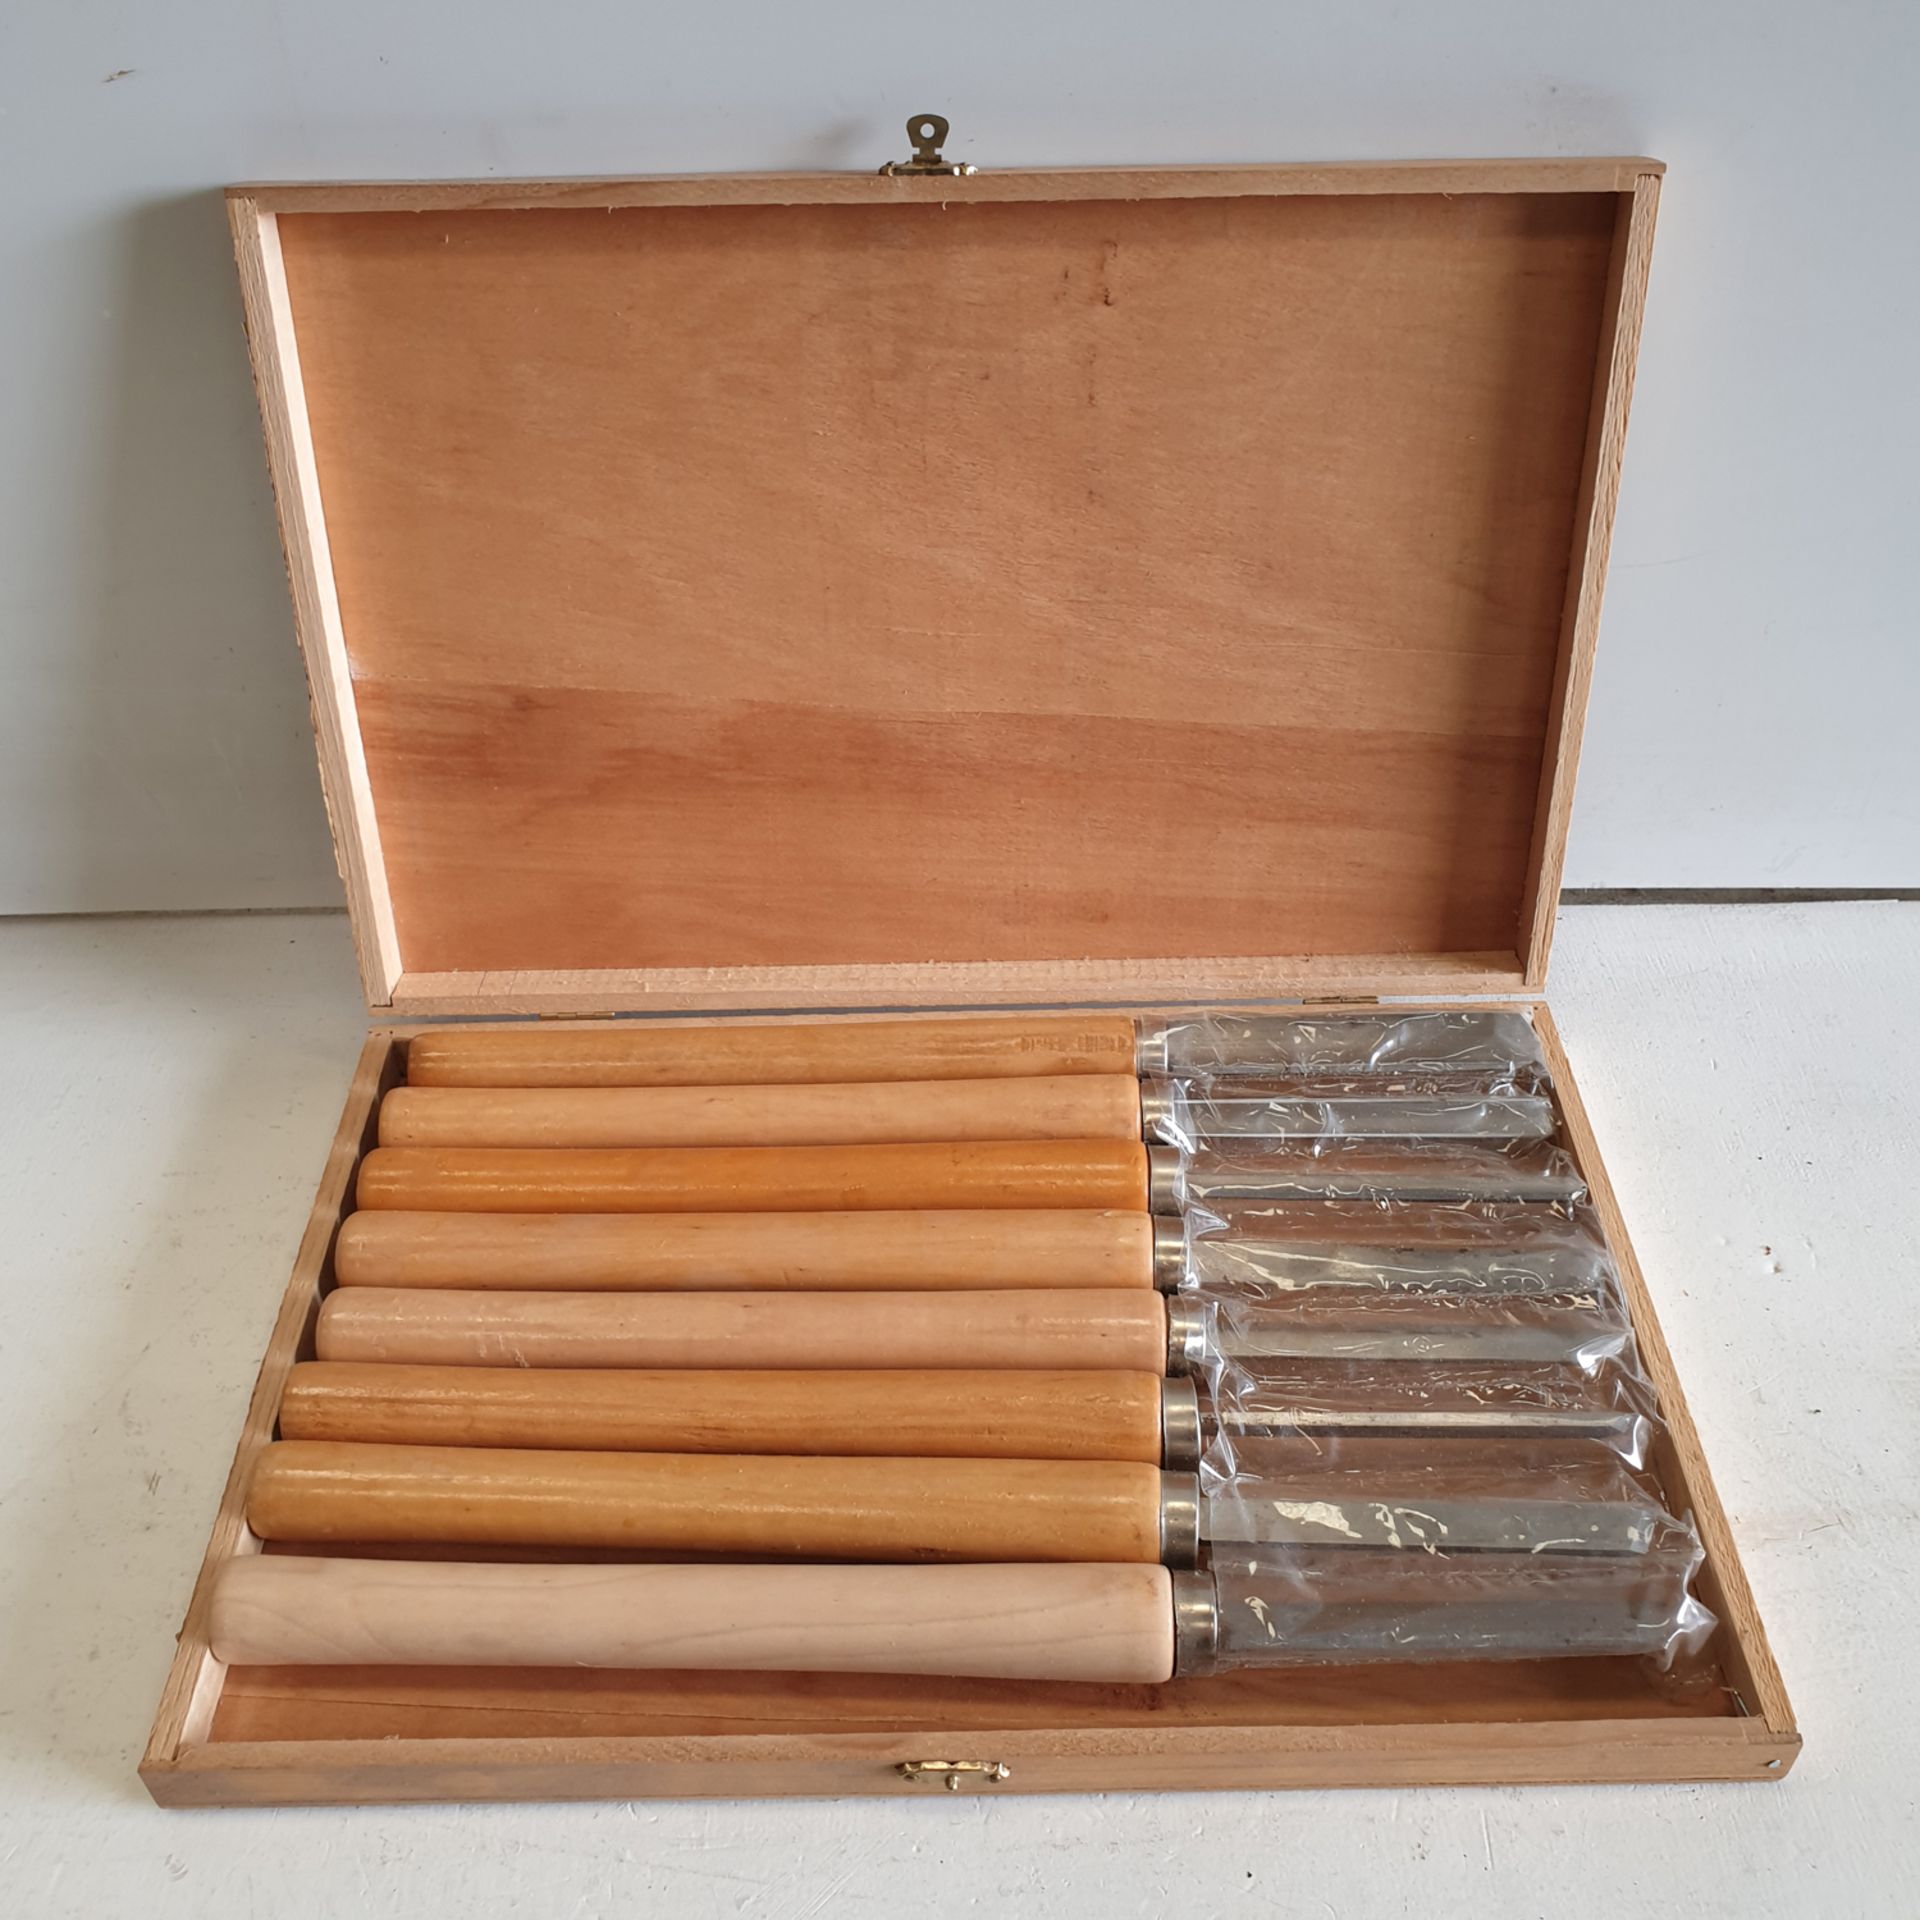 Boxed Selection of Chisels.